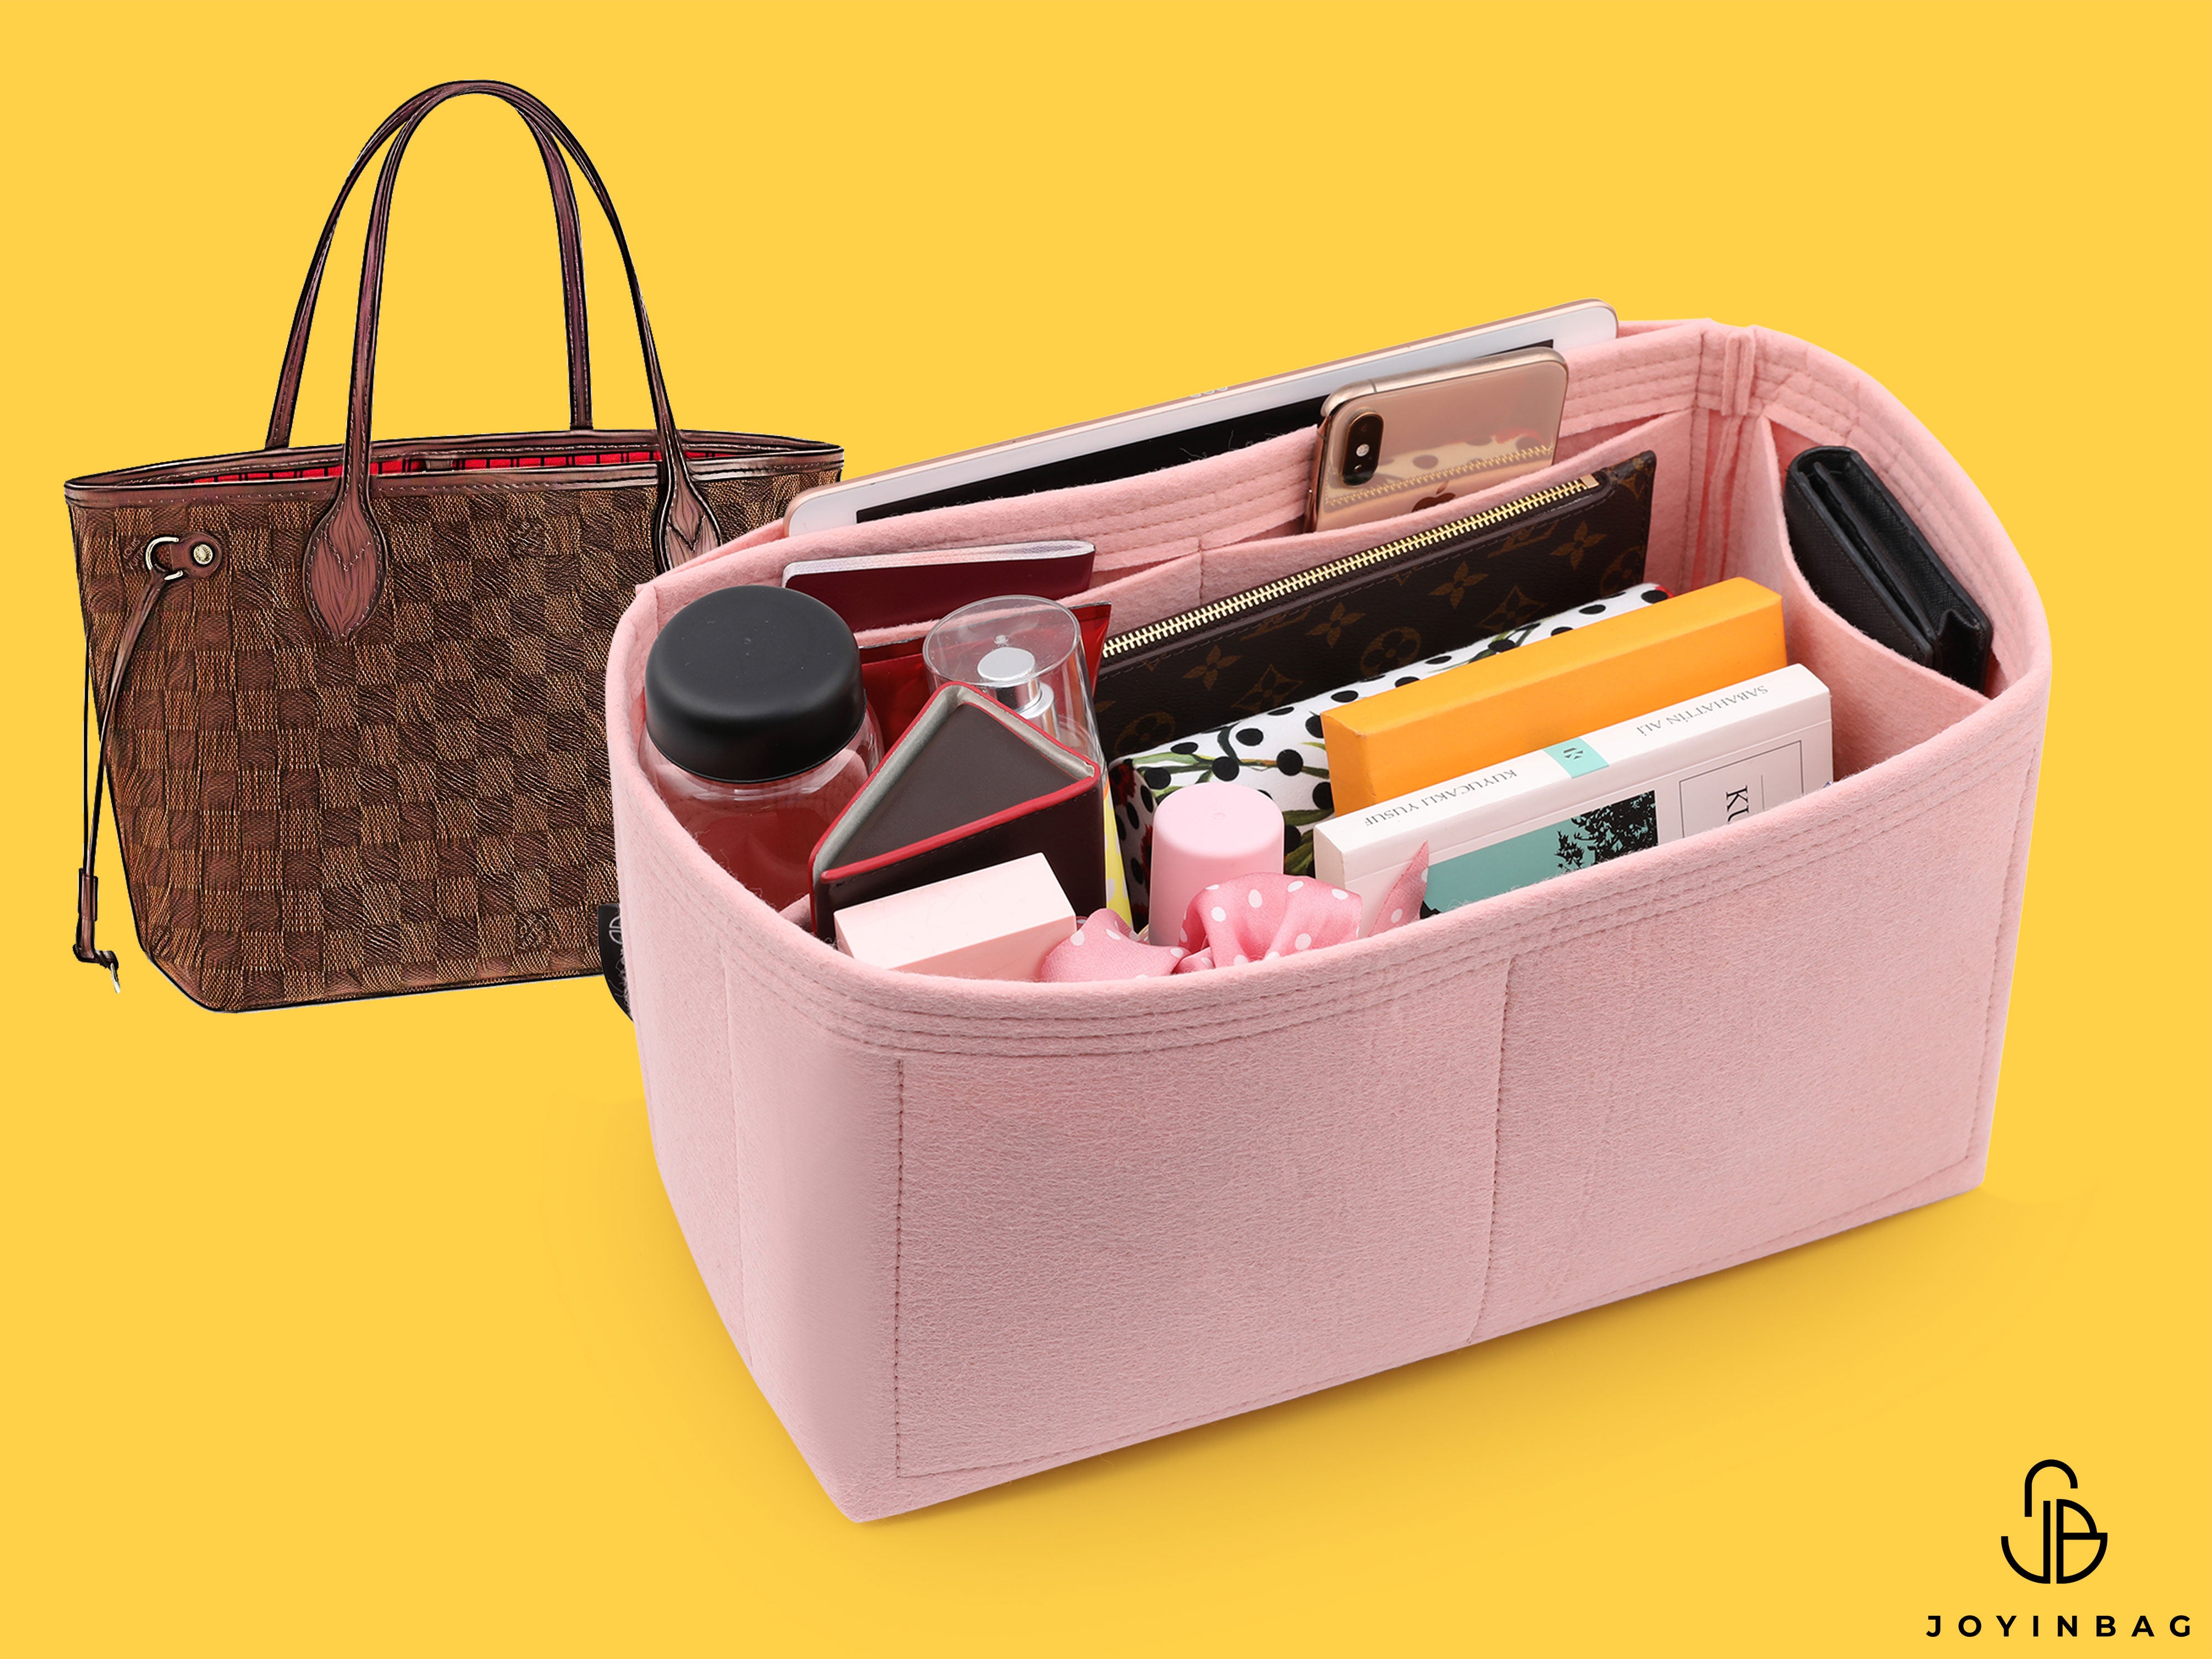 Bag and Purse Organizer with Regular Style for Louis Vuitton Neverfull